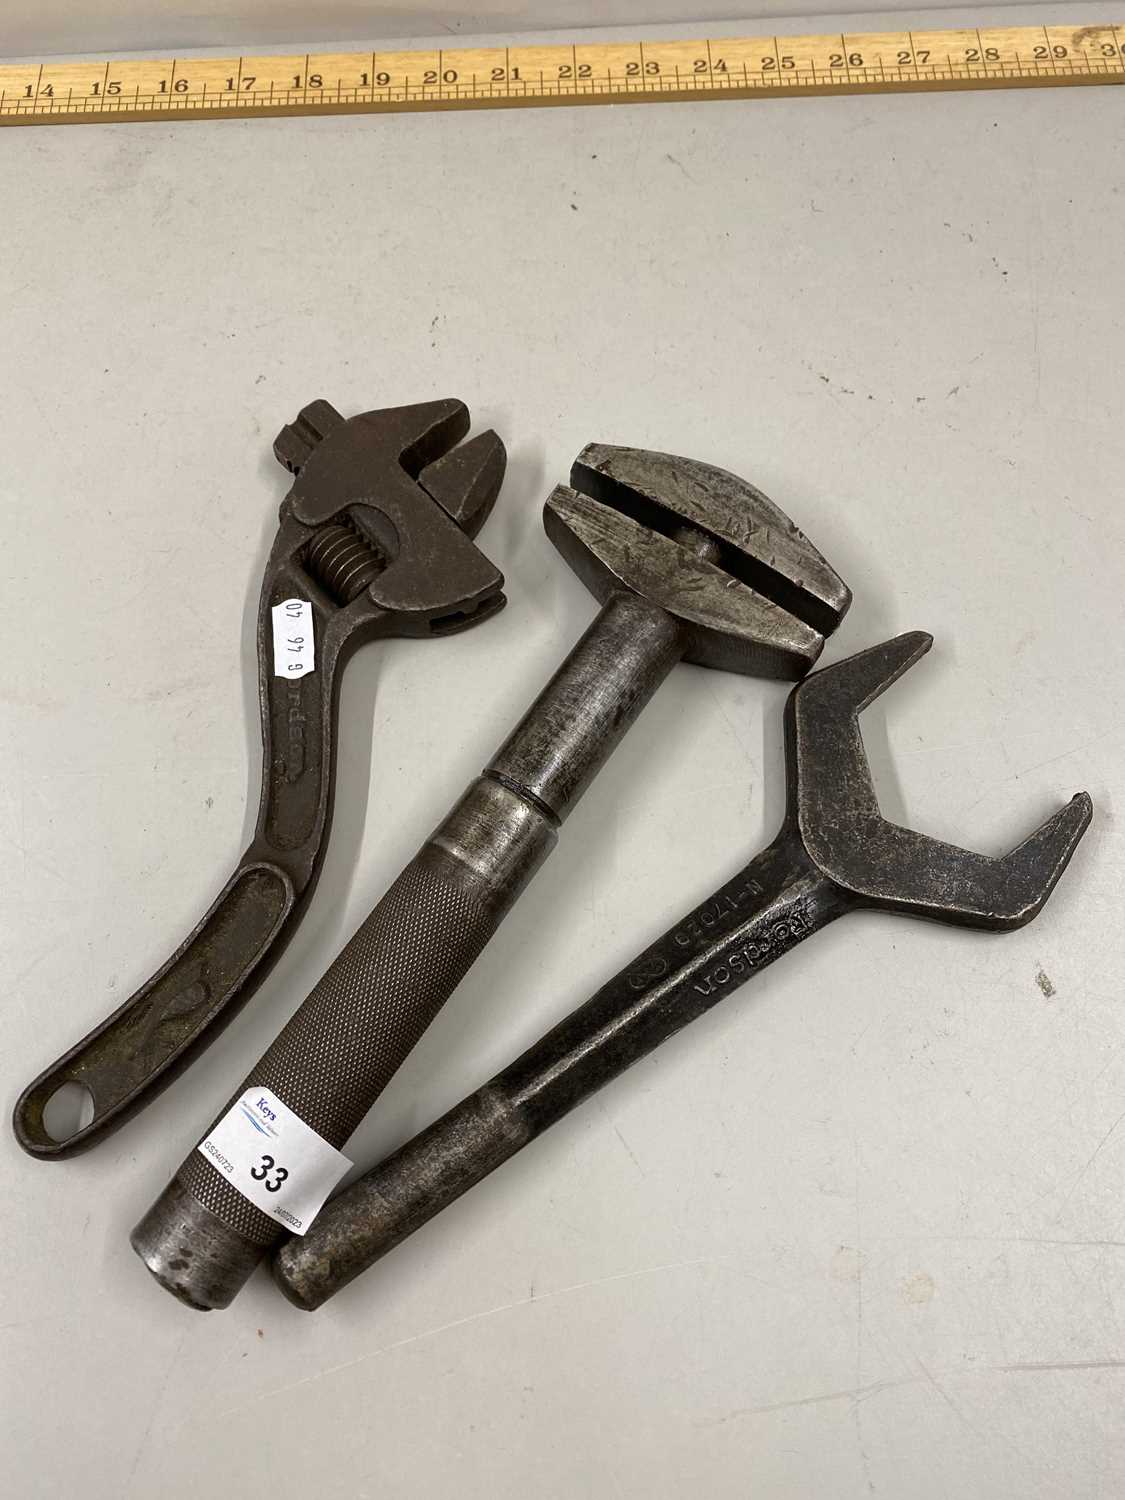 Fordson adjustable spanner together with a further spanner and an adjustable wrench